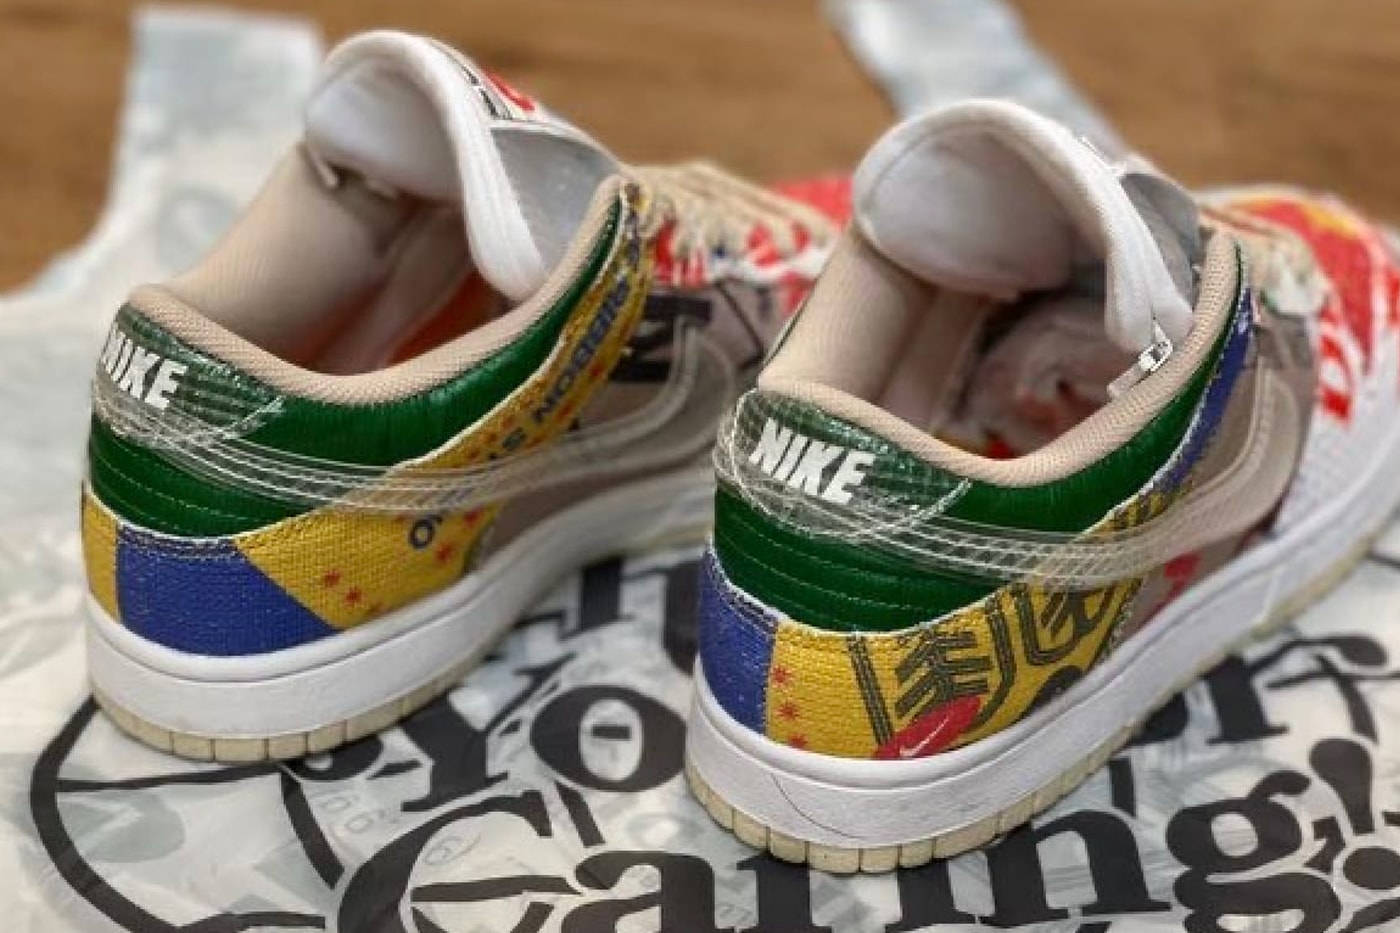 Nike Dunk Low SP Thank You For Caring First Look Release Info DA6125-900 Multi-Color Date Buy Price 